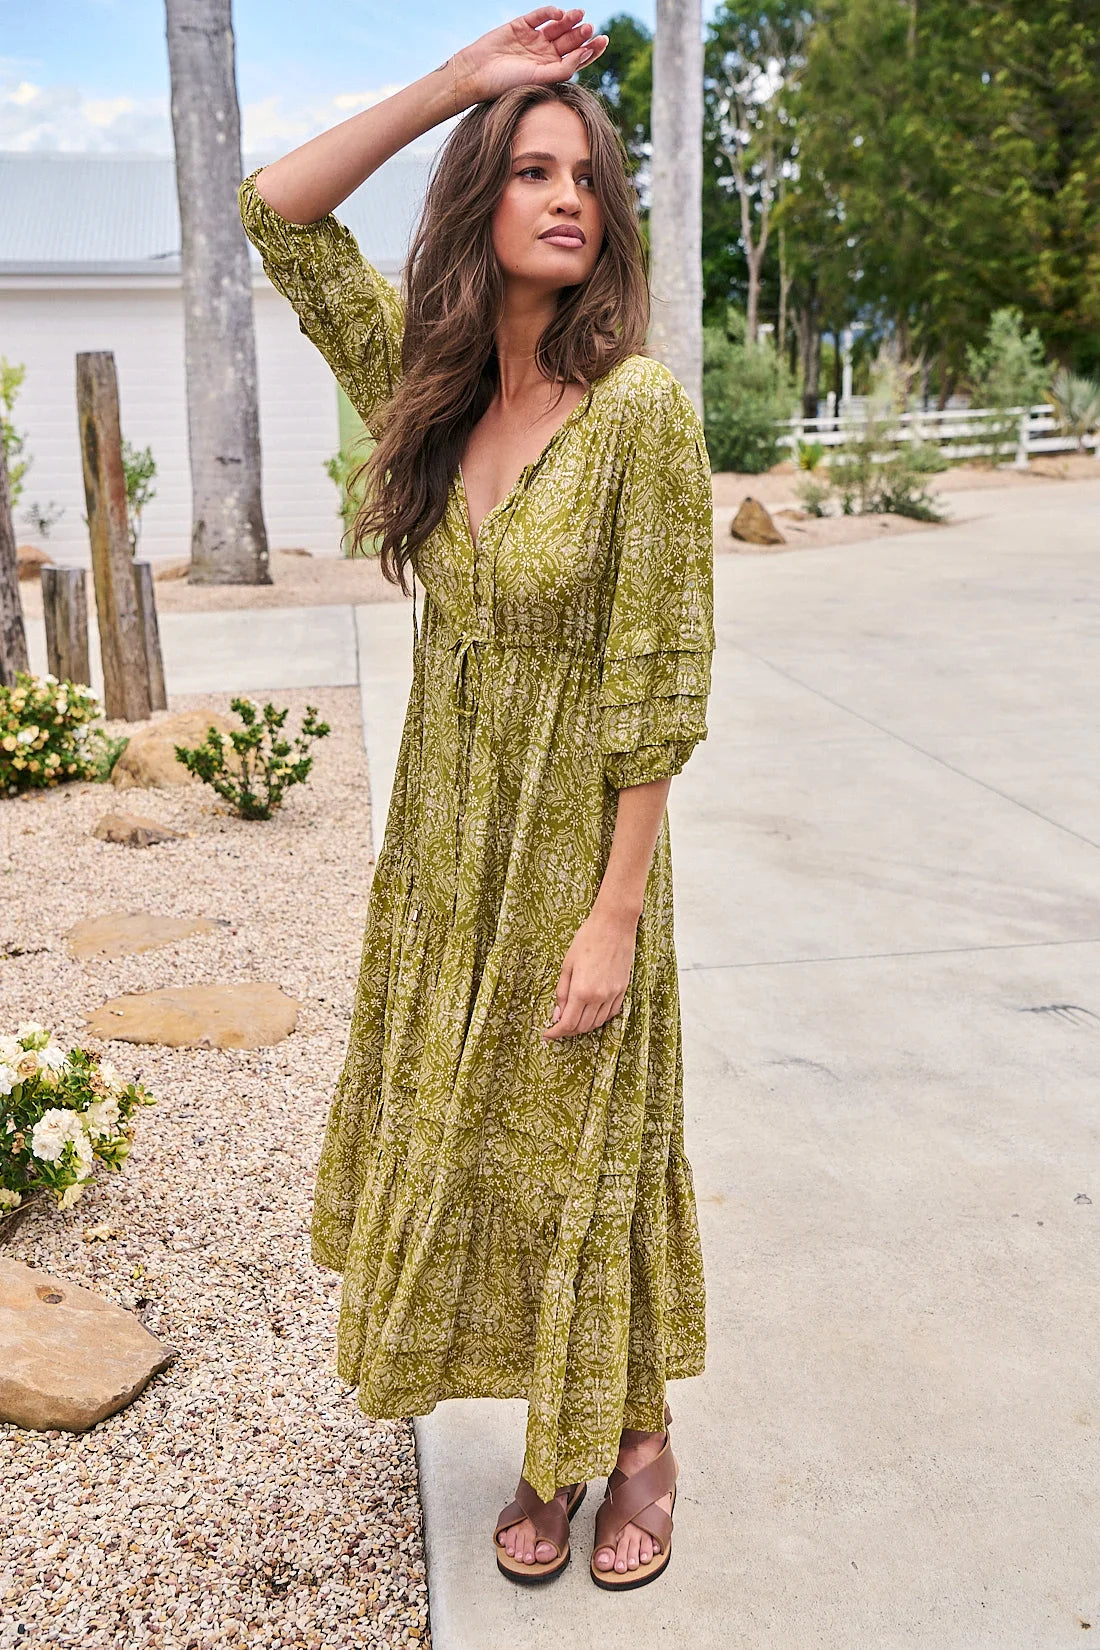 Indulge in exquisite elegance with the Mariana Dress. The Sevillano Print adorns the flowing V Neckline and frilled hem, while lace detailing adds texture and sophistication. The drawstring at the waist allows for a perfect fit. A work of art that will leave a lasting impression.